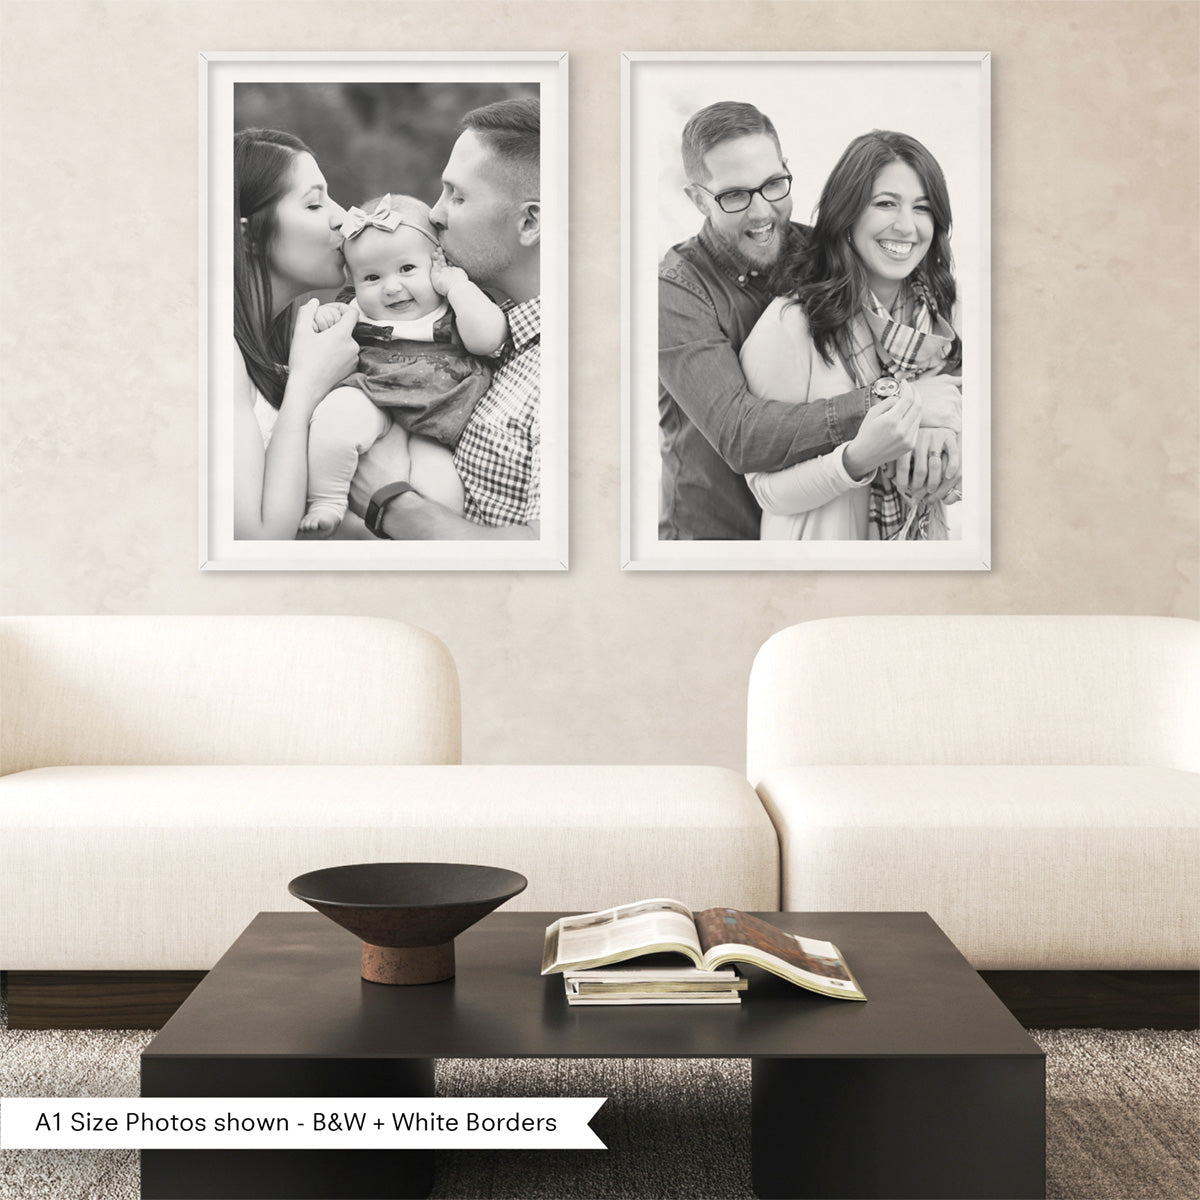 Personalised Family Wall Art Prints - Custom Gallery Wall Photo Set of Two. Posters, Canvas or Framed Photos